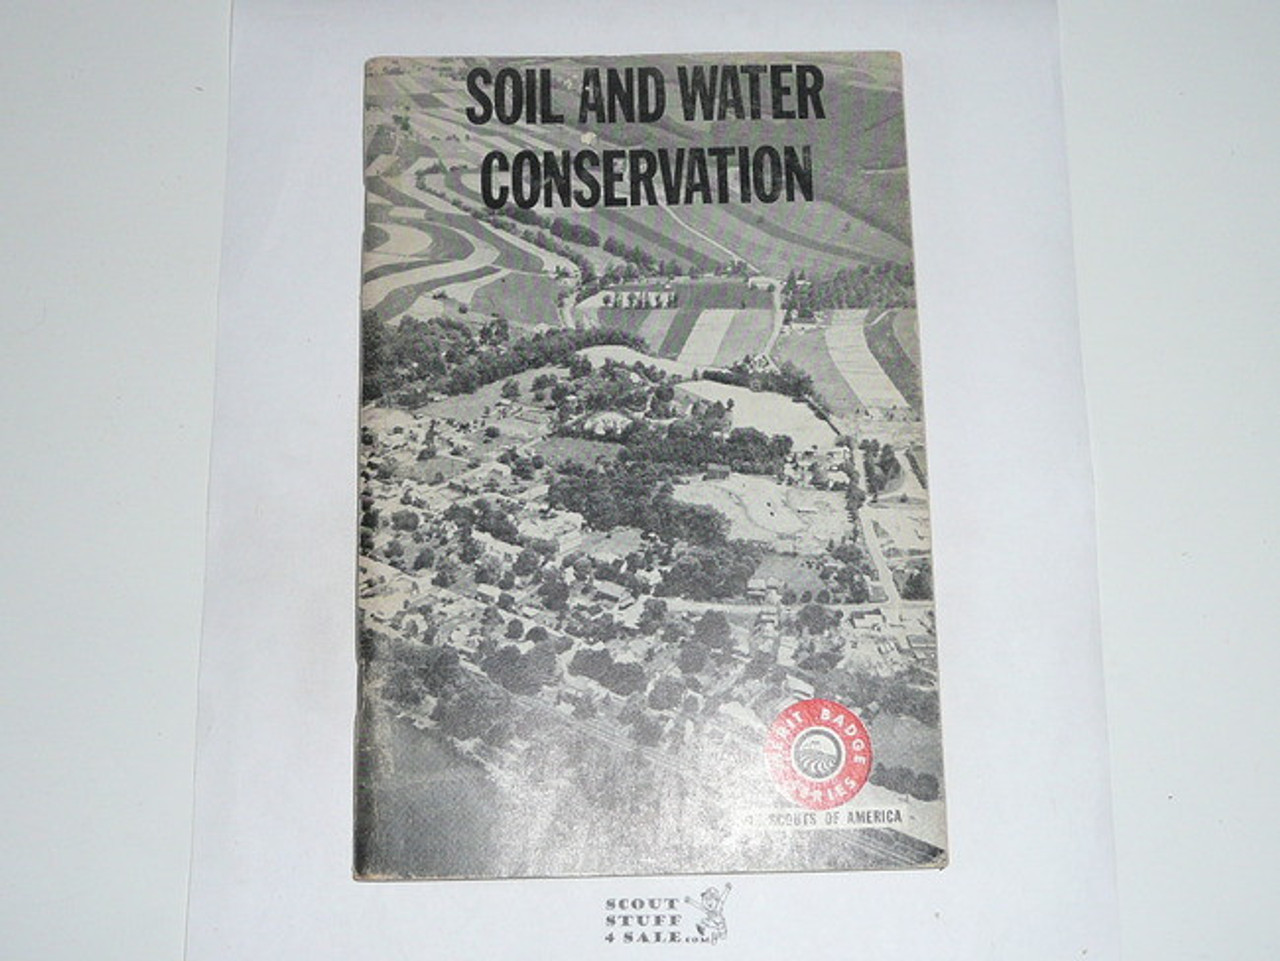 Soil and Water Conservation Merit Badge Pamphlet, Type 7, Full Picture, 4-71 Printing